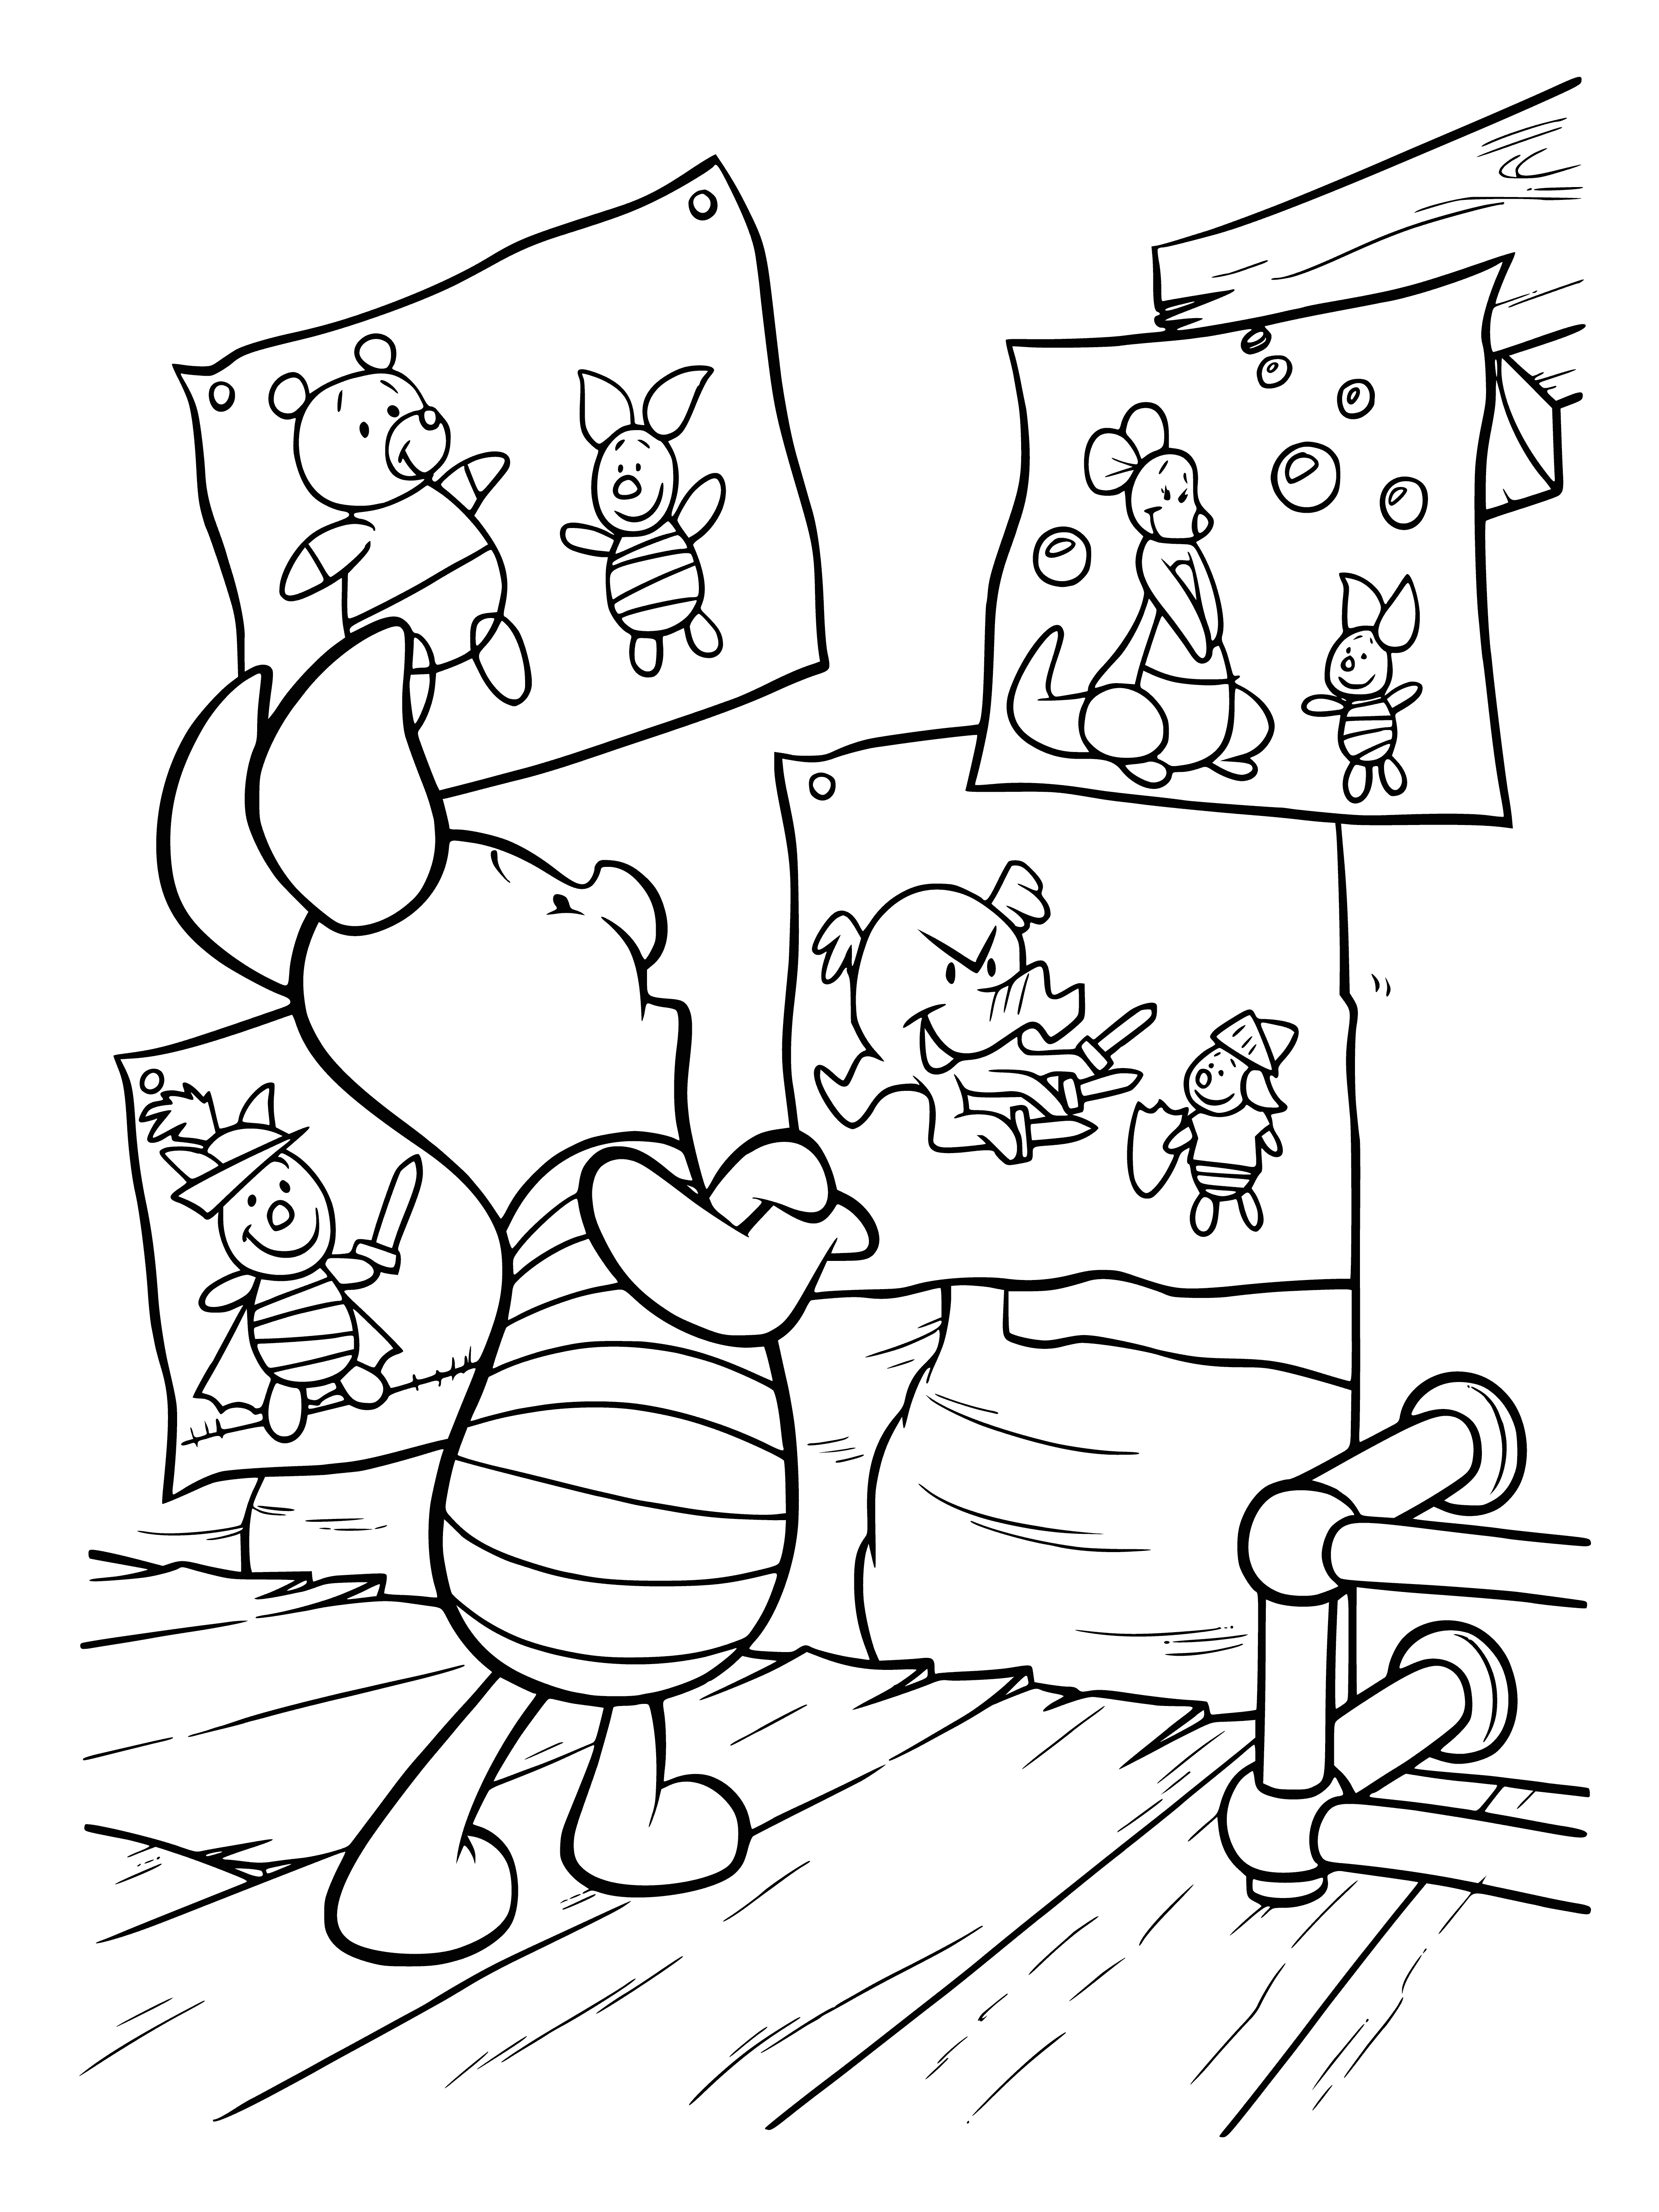 Exhibition of paintings coloring page